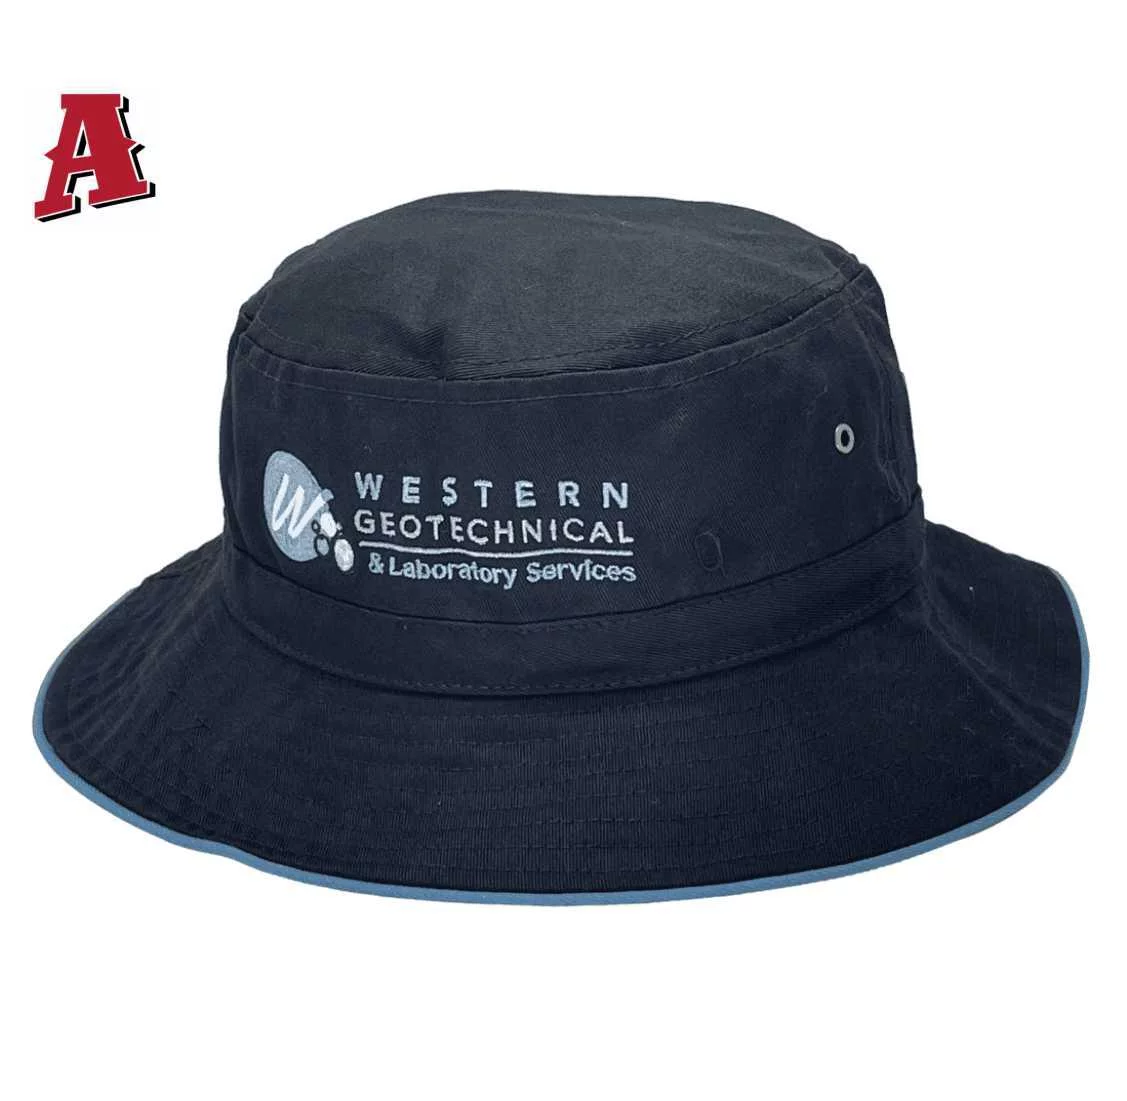 Western Geotechnical and Laboratory Services Welshpool WA Aussie Bucket Hat One Size Fits All Toggle Crown with Optional Brim Size - Black Blue